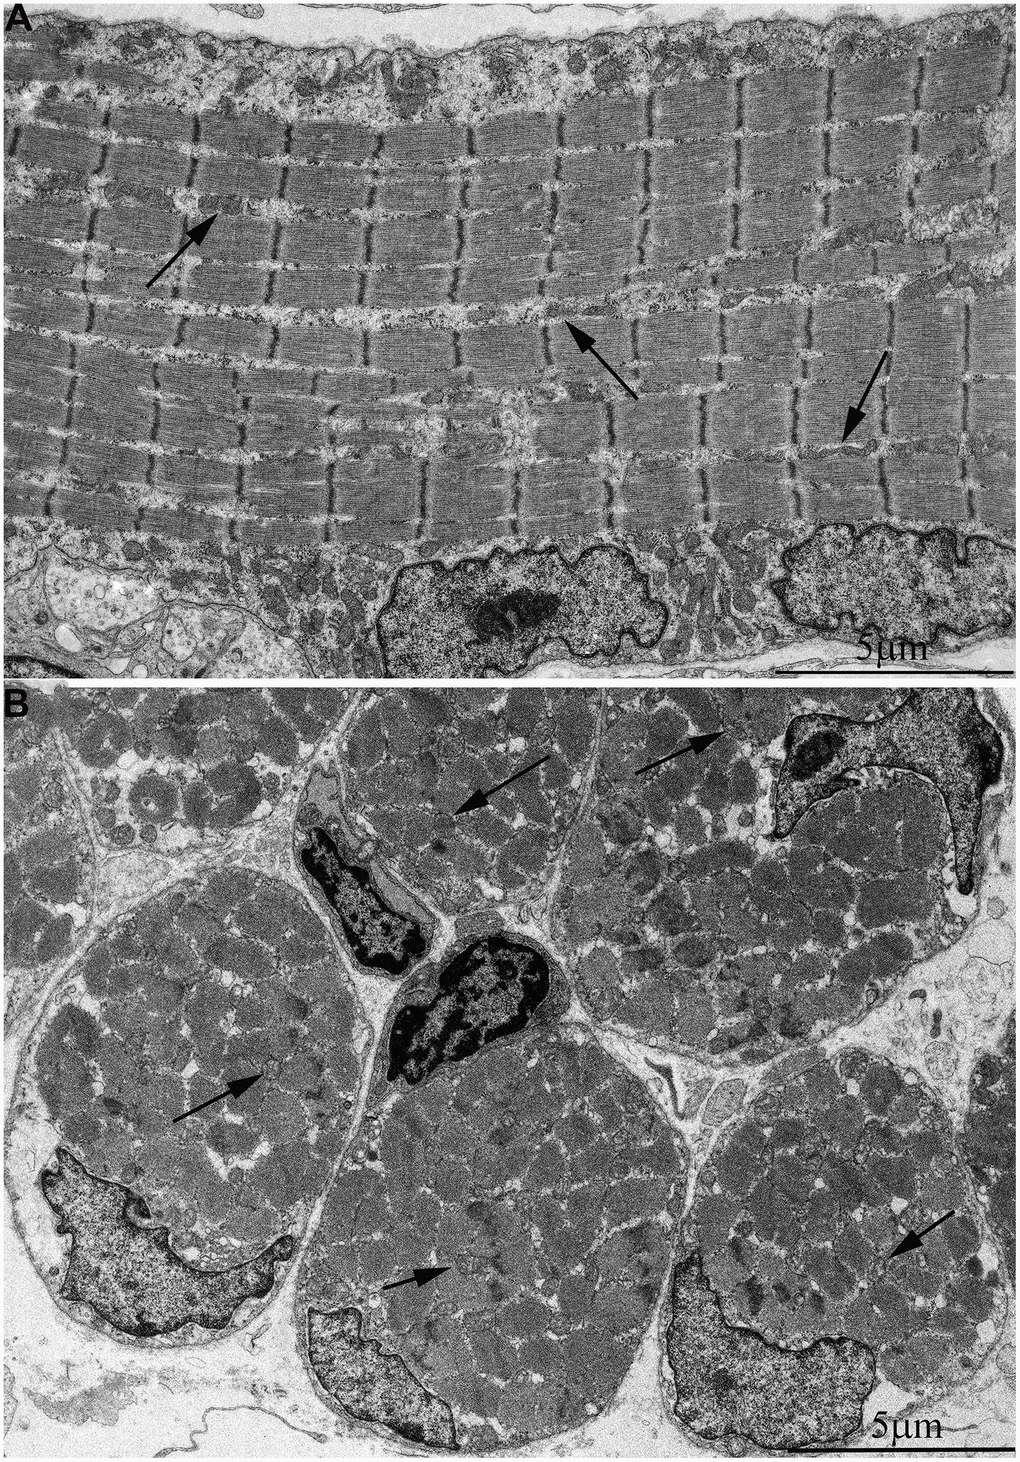 Ultrastructure of mitochondria in skeletal muscle of one-week-old naked mole rat. (A) Longitudinal section. Arrows indicate mitochondria. (B) Cross section. Widely spaced, small mitochondria are observed on the longitudinal and cross section of muscle fiber. Arrows indicate mitochondria.